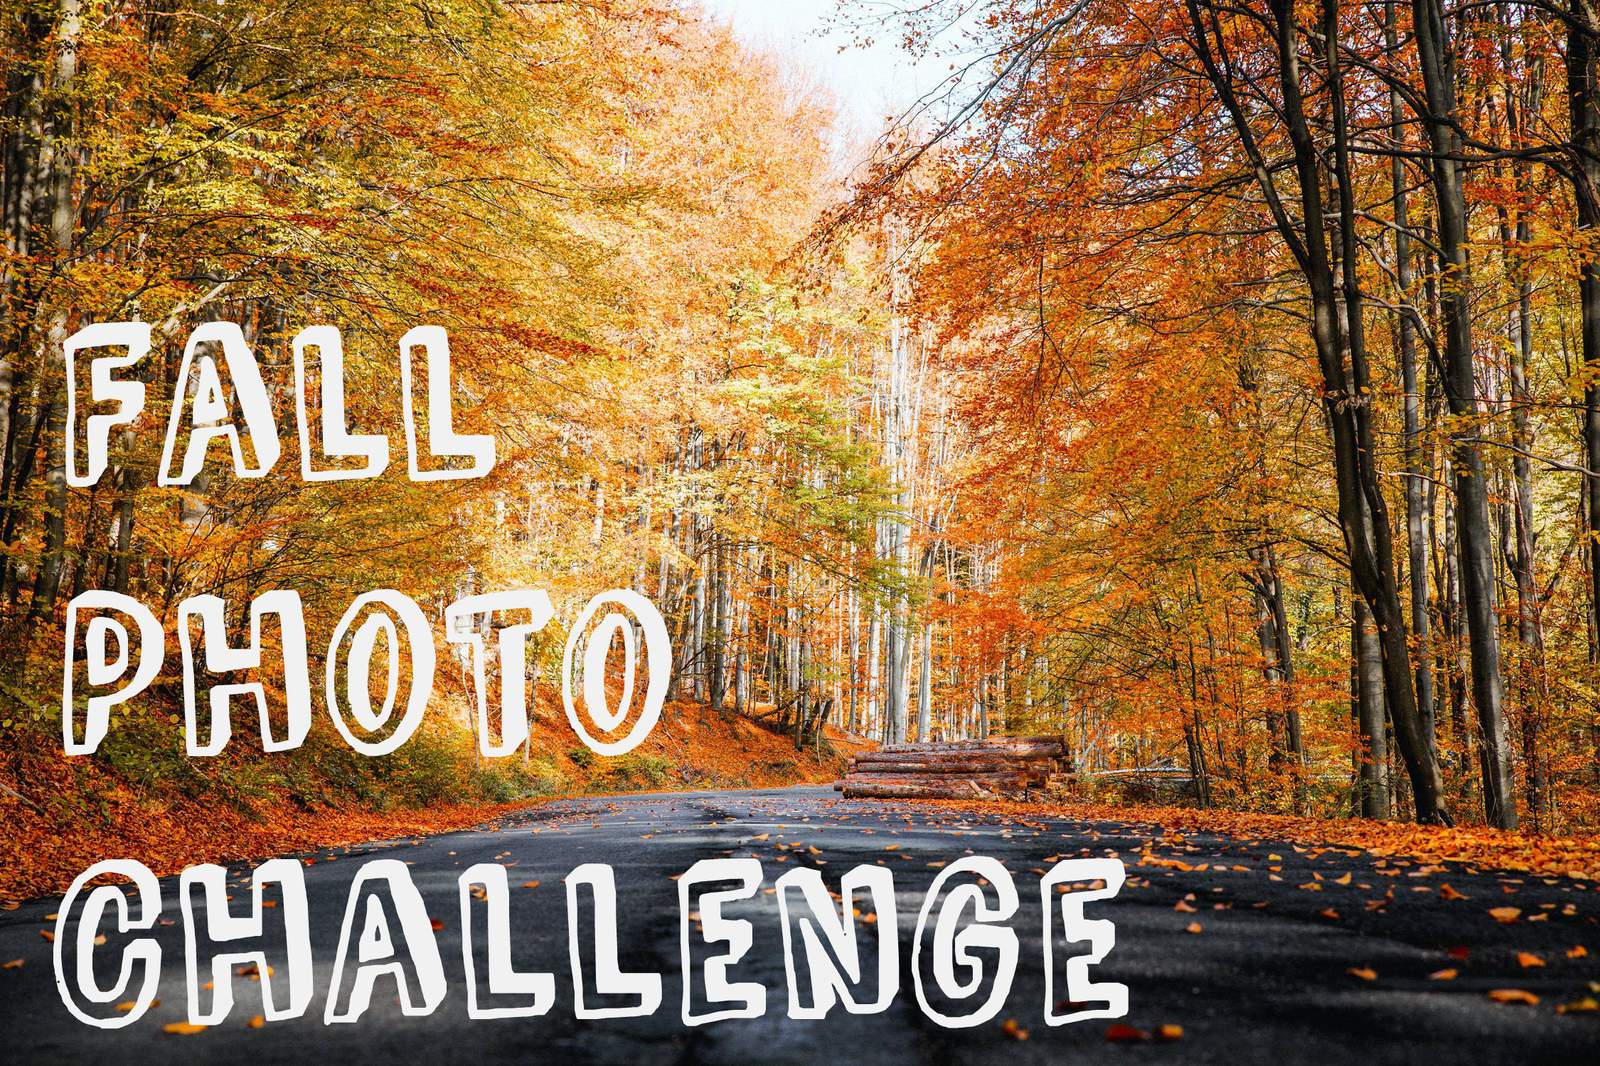 Submit your pictures to the A4 Fall Photo Challenge